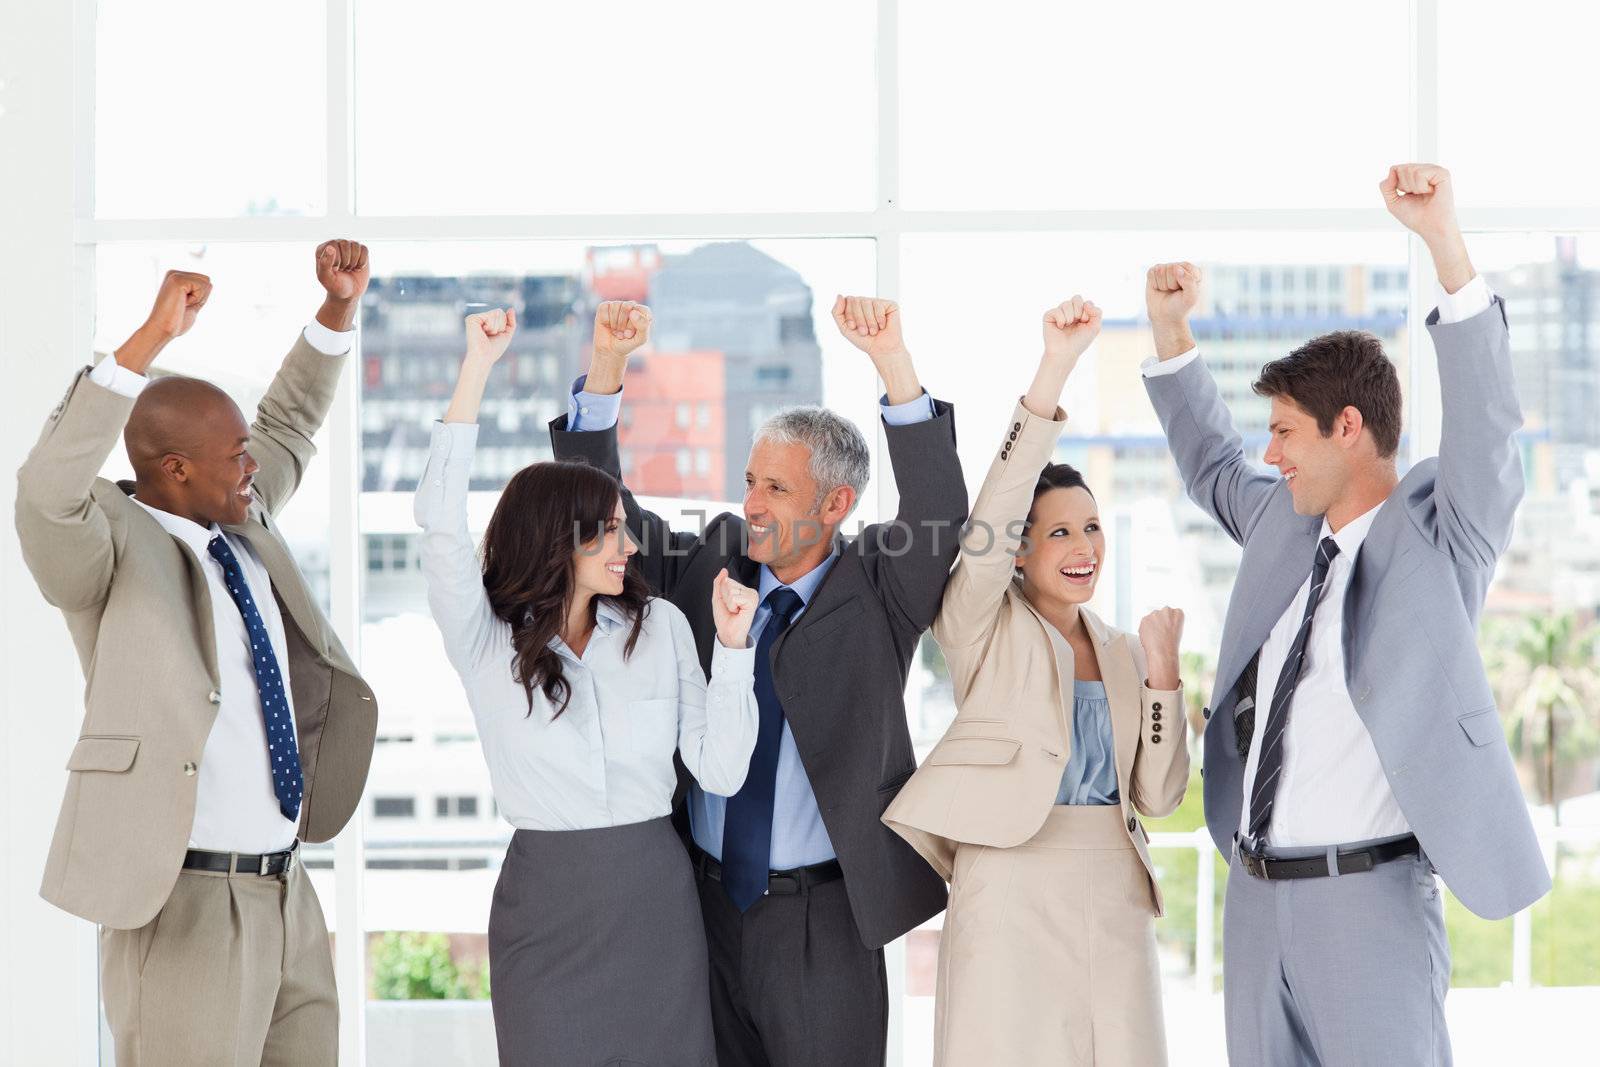 Smiling business people looking at each other and raising their arms in success